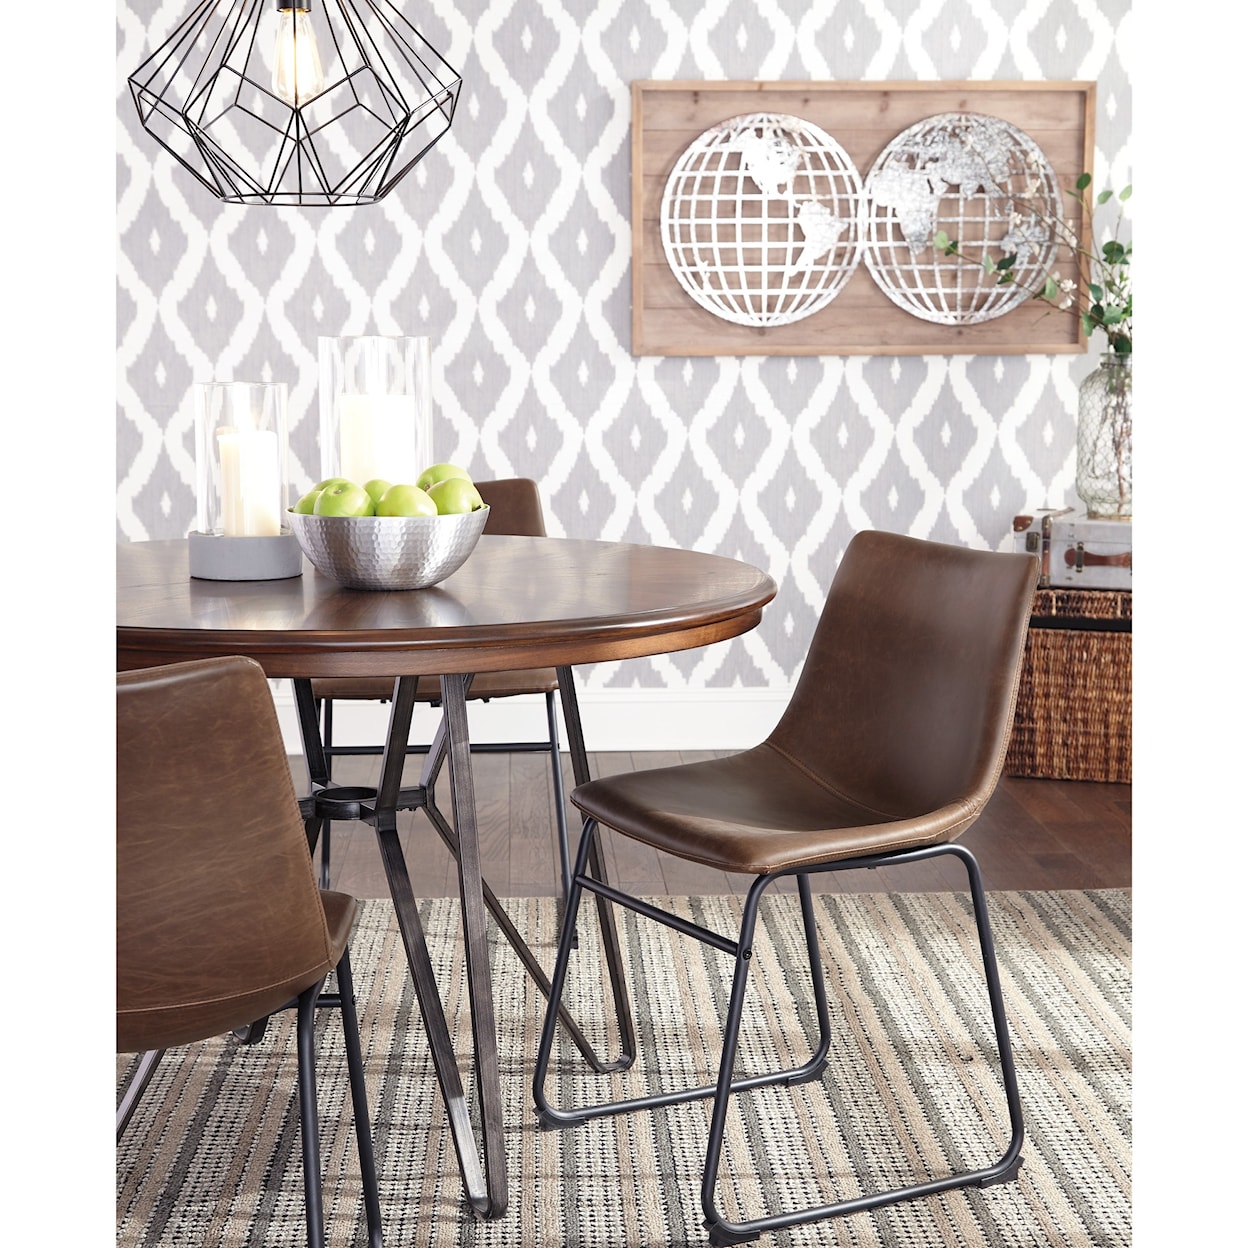 Signature Design by Ashley Centiar Dining Table